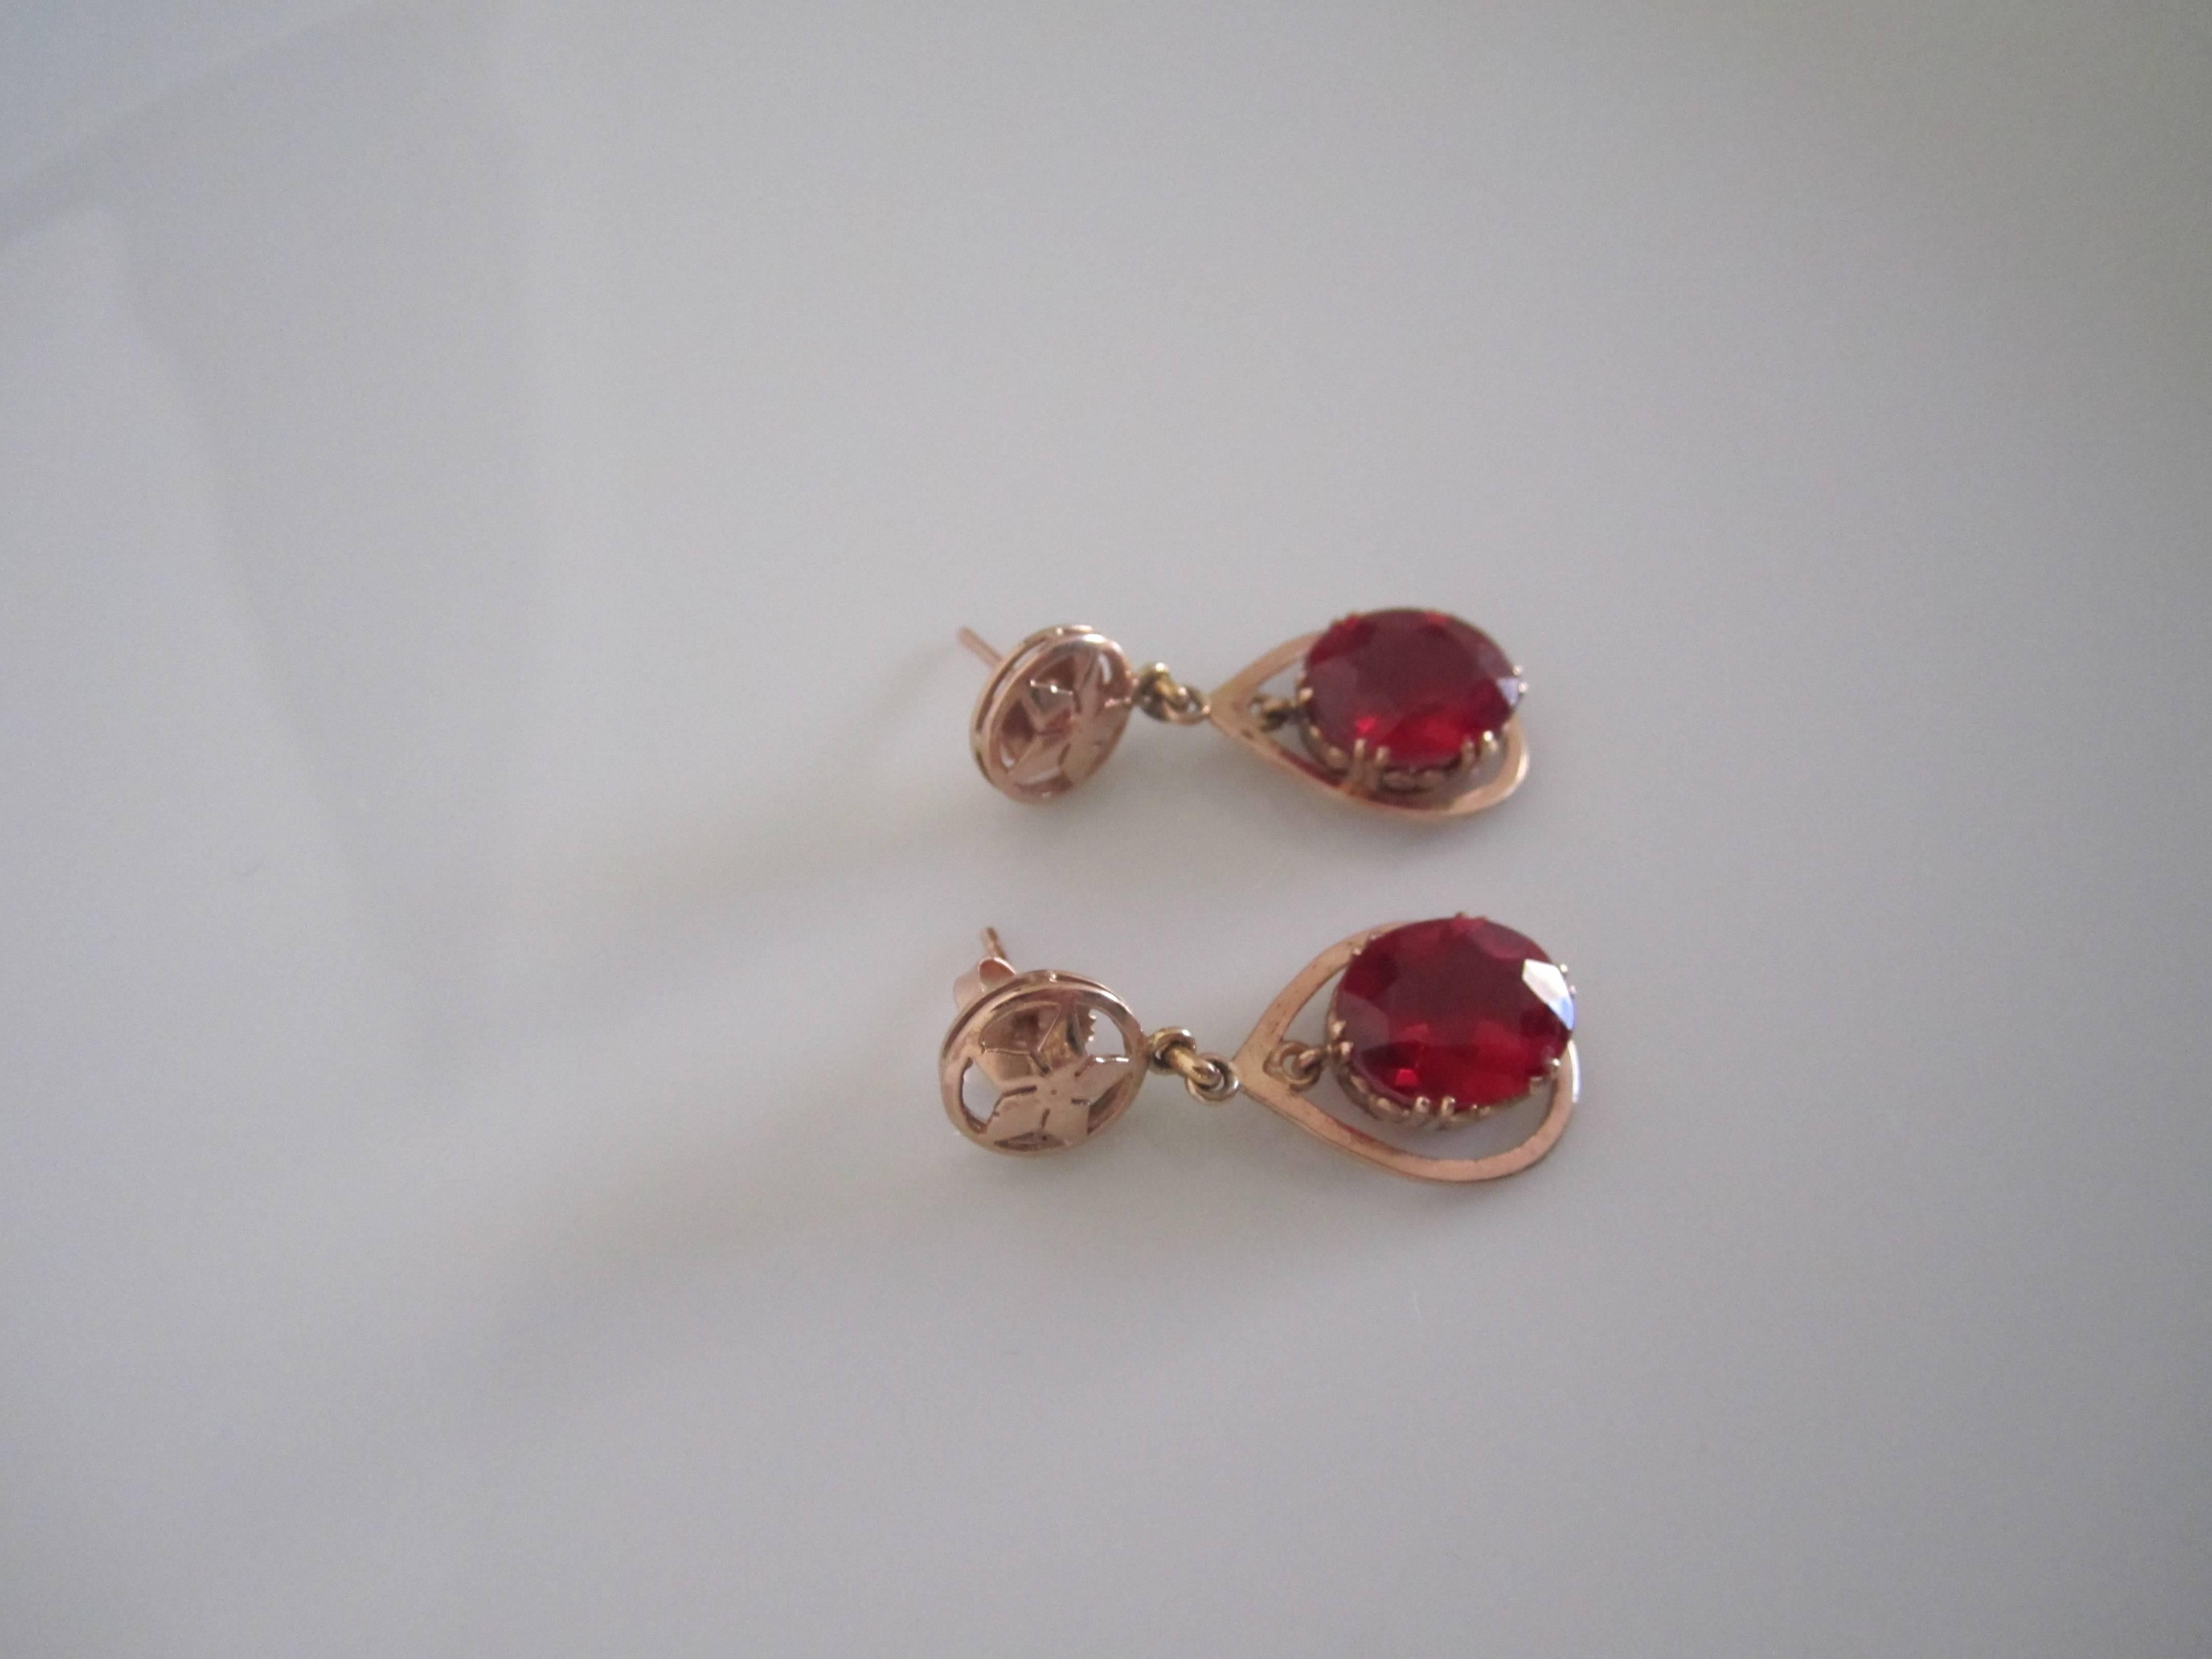 Vintage 14-Karat Pink Gold Earrings with Red Ruby Style Stones 1